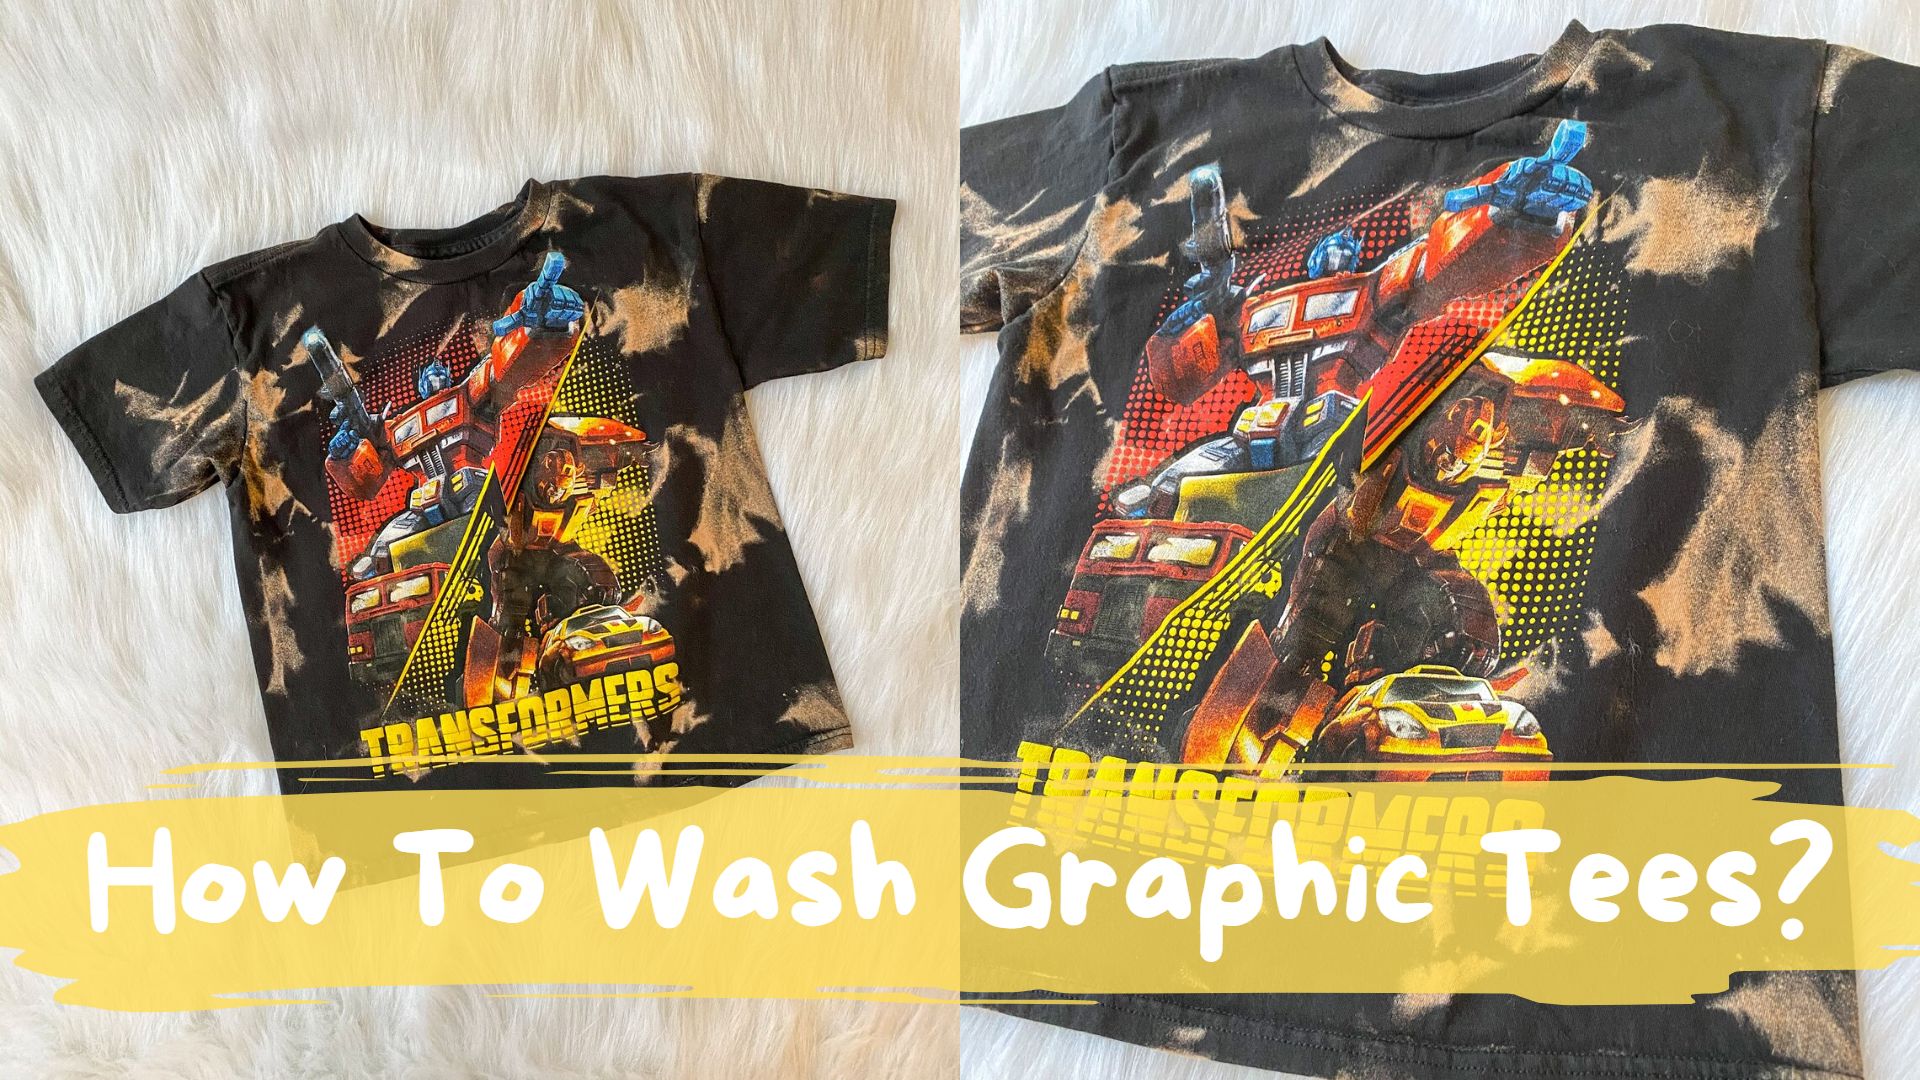 How To Wash Graphic Tees